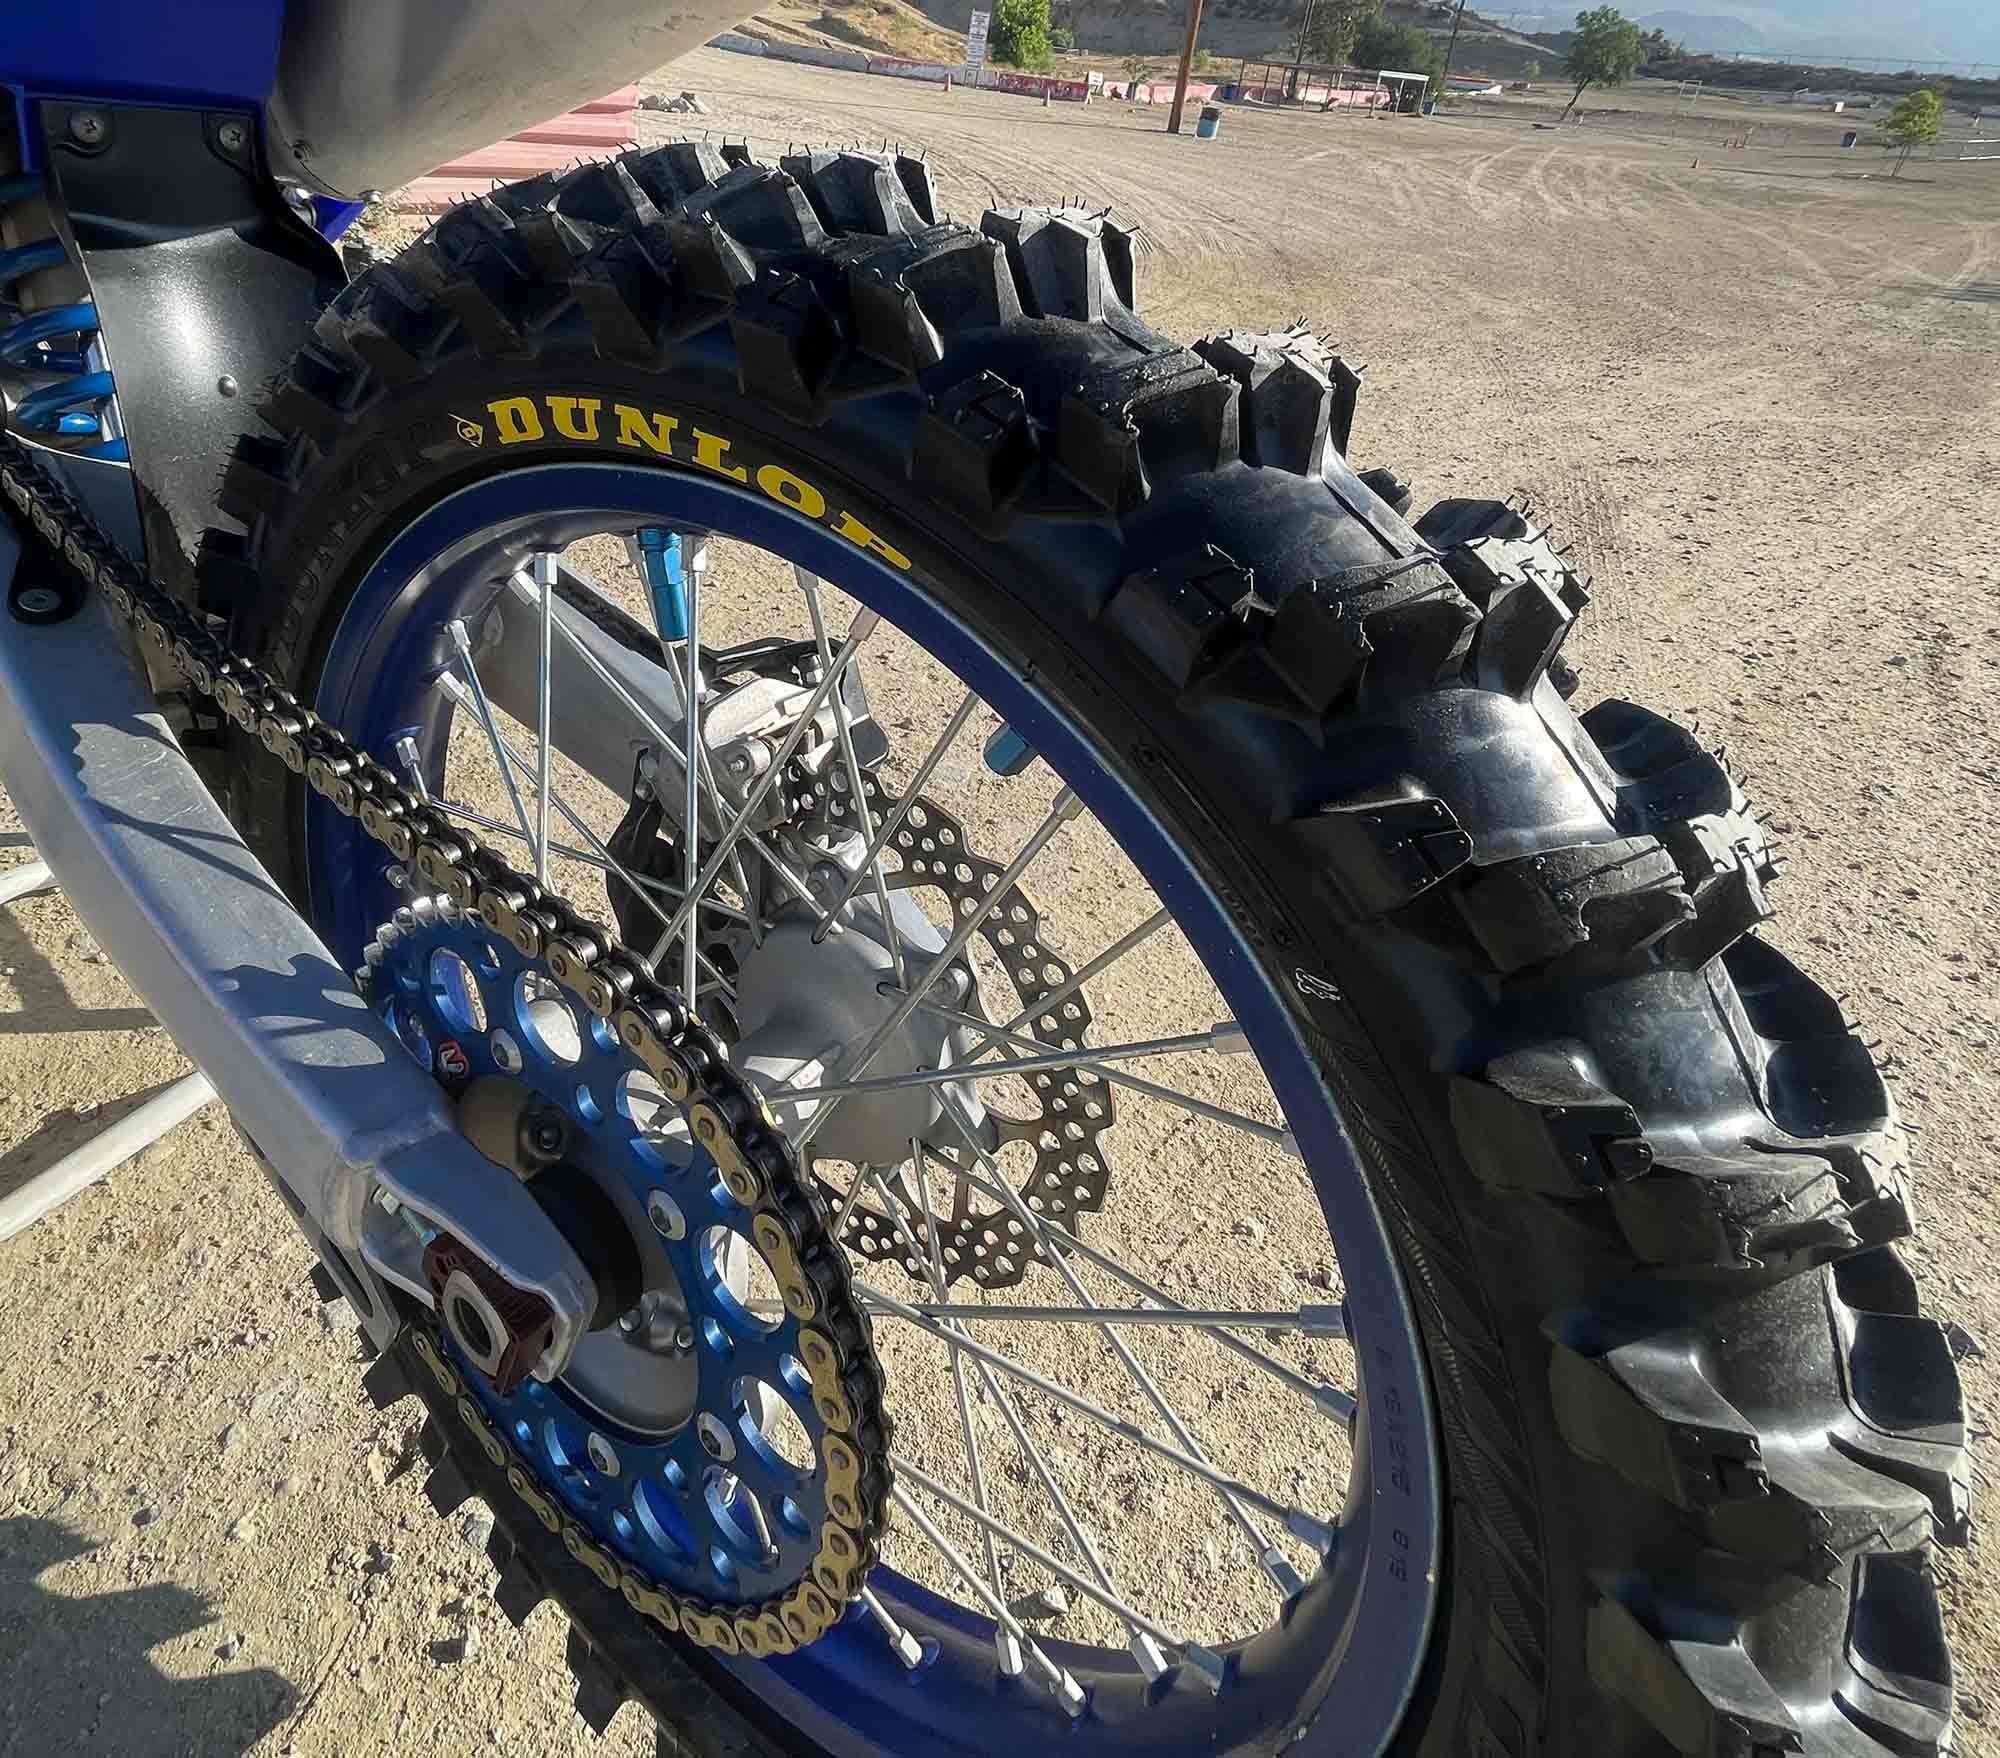 If there’s a tire designed to throw roost at your buddies, this is it.